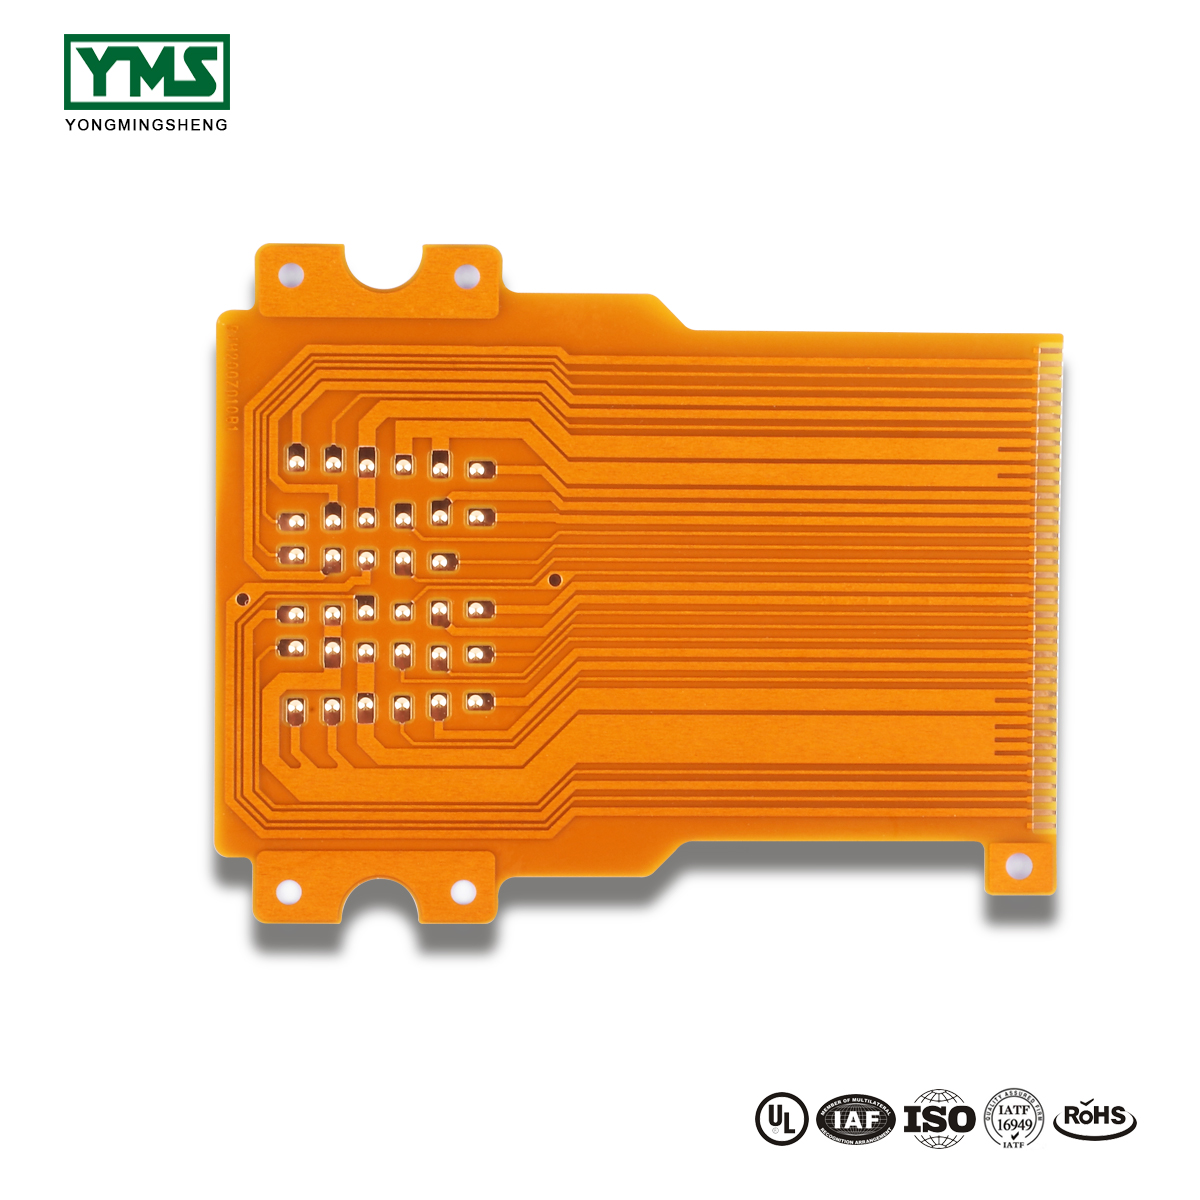 Best quality 2layer Alu Core Pcb - 1Layer Raised Point flexible Board | YMSPCB – Yongmingsheng